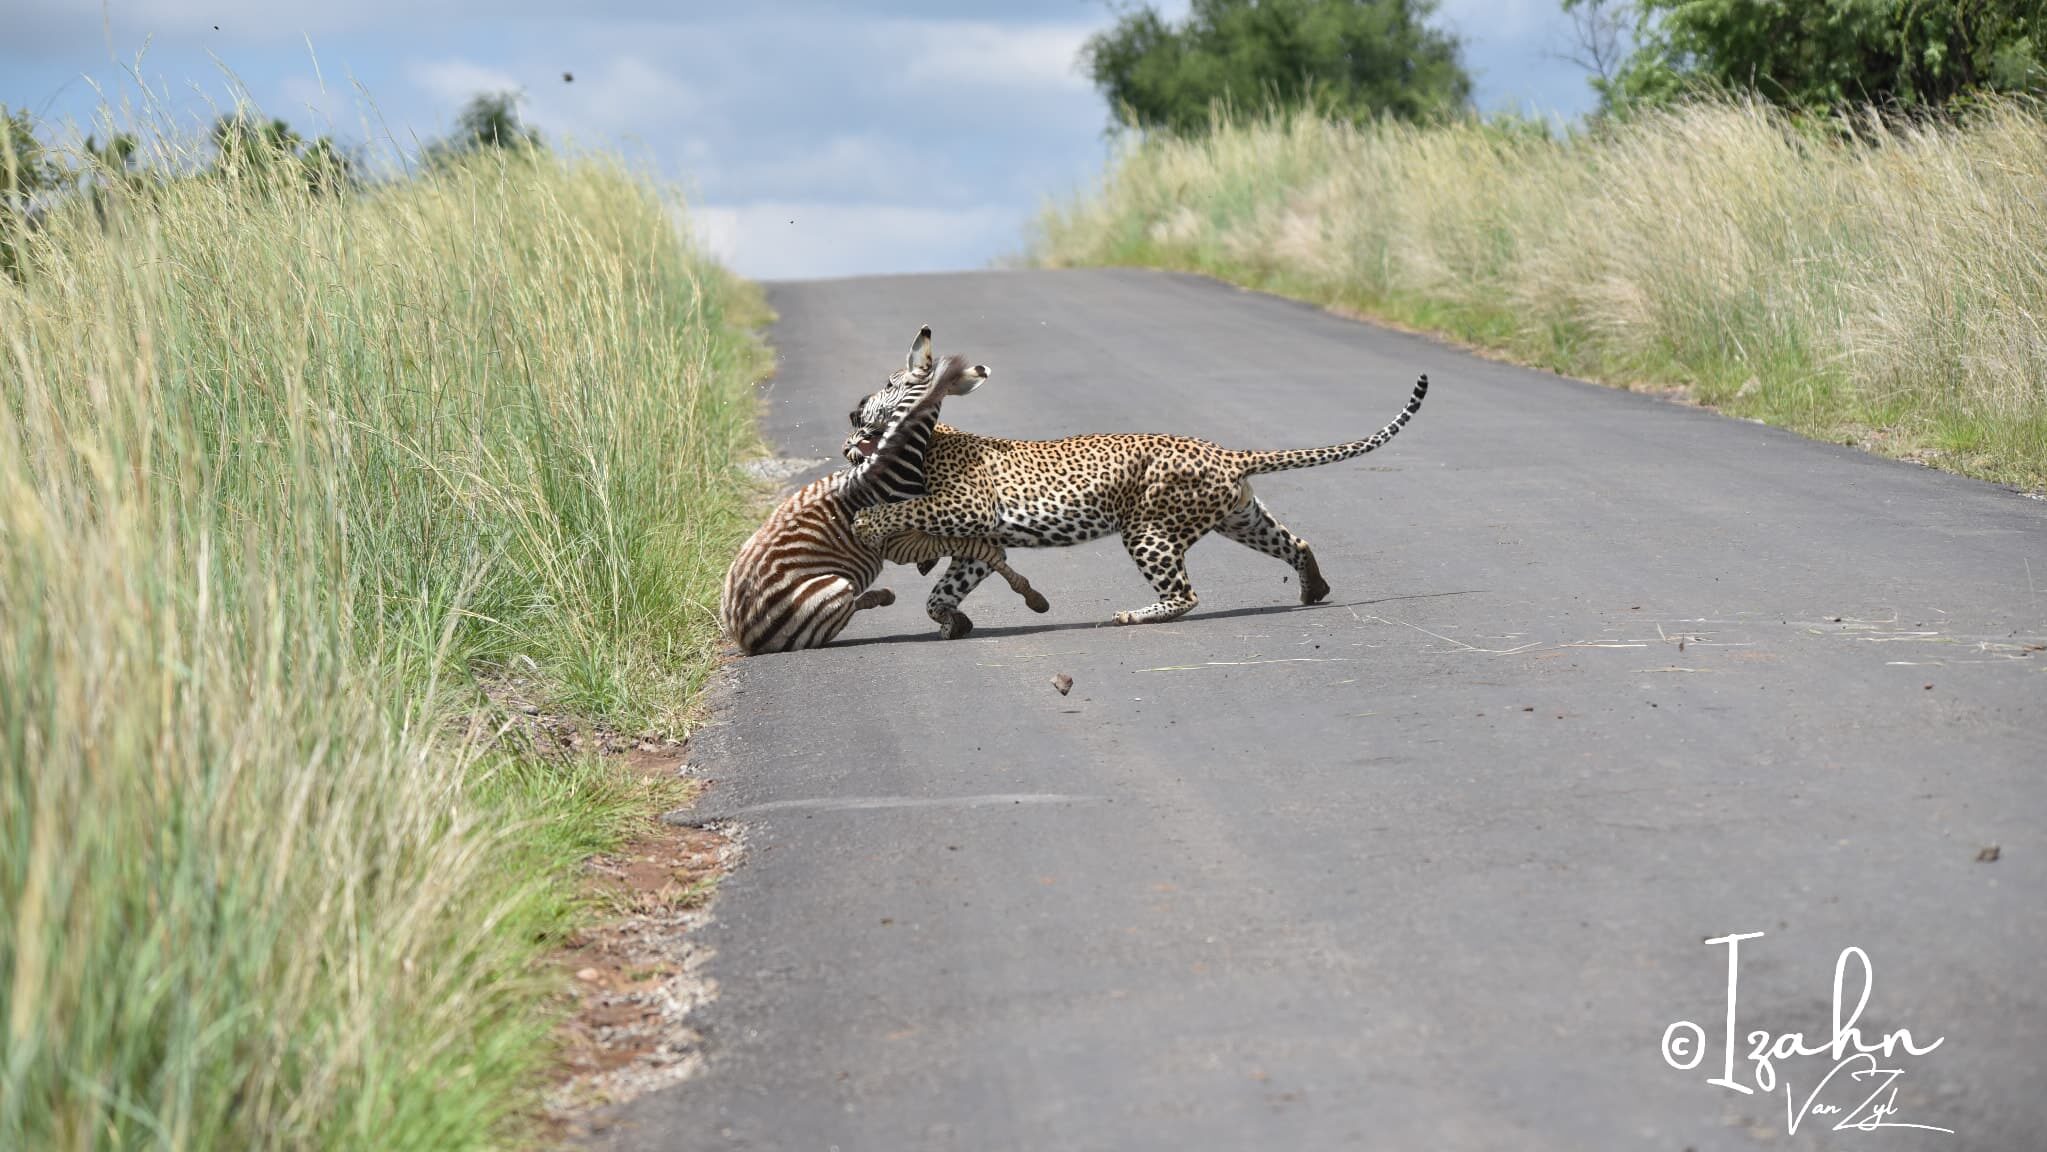 Leopard Causes Baby Zebra To Slip on Road